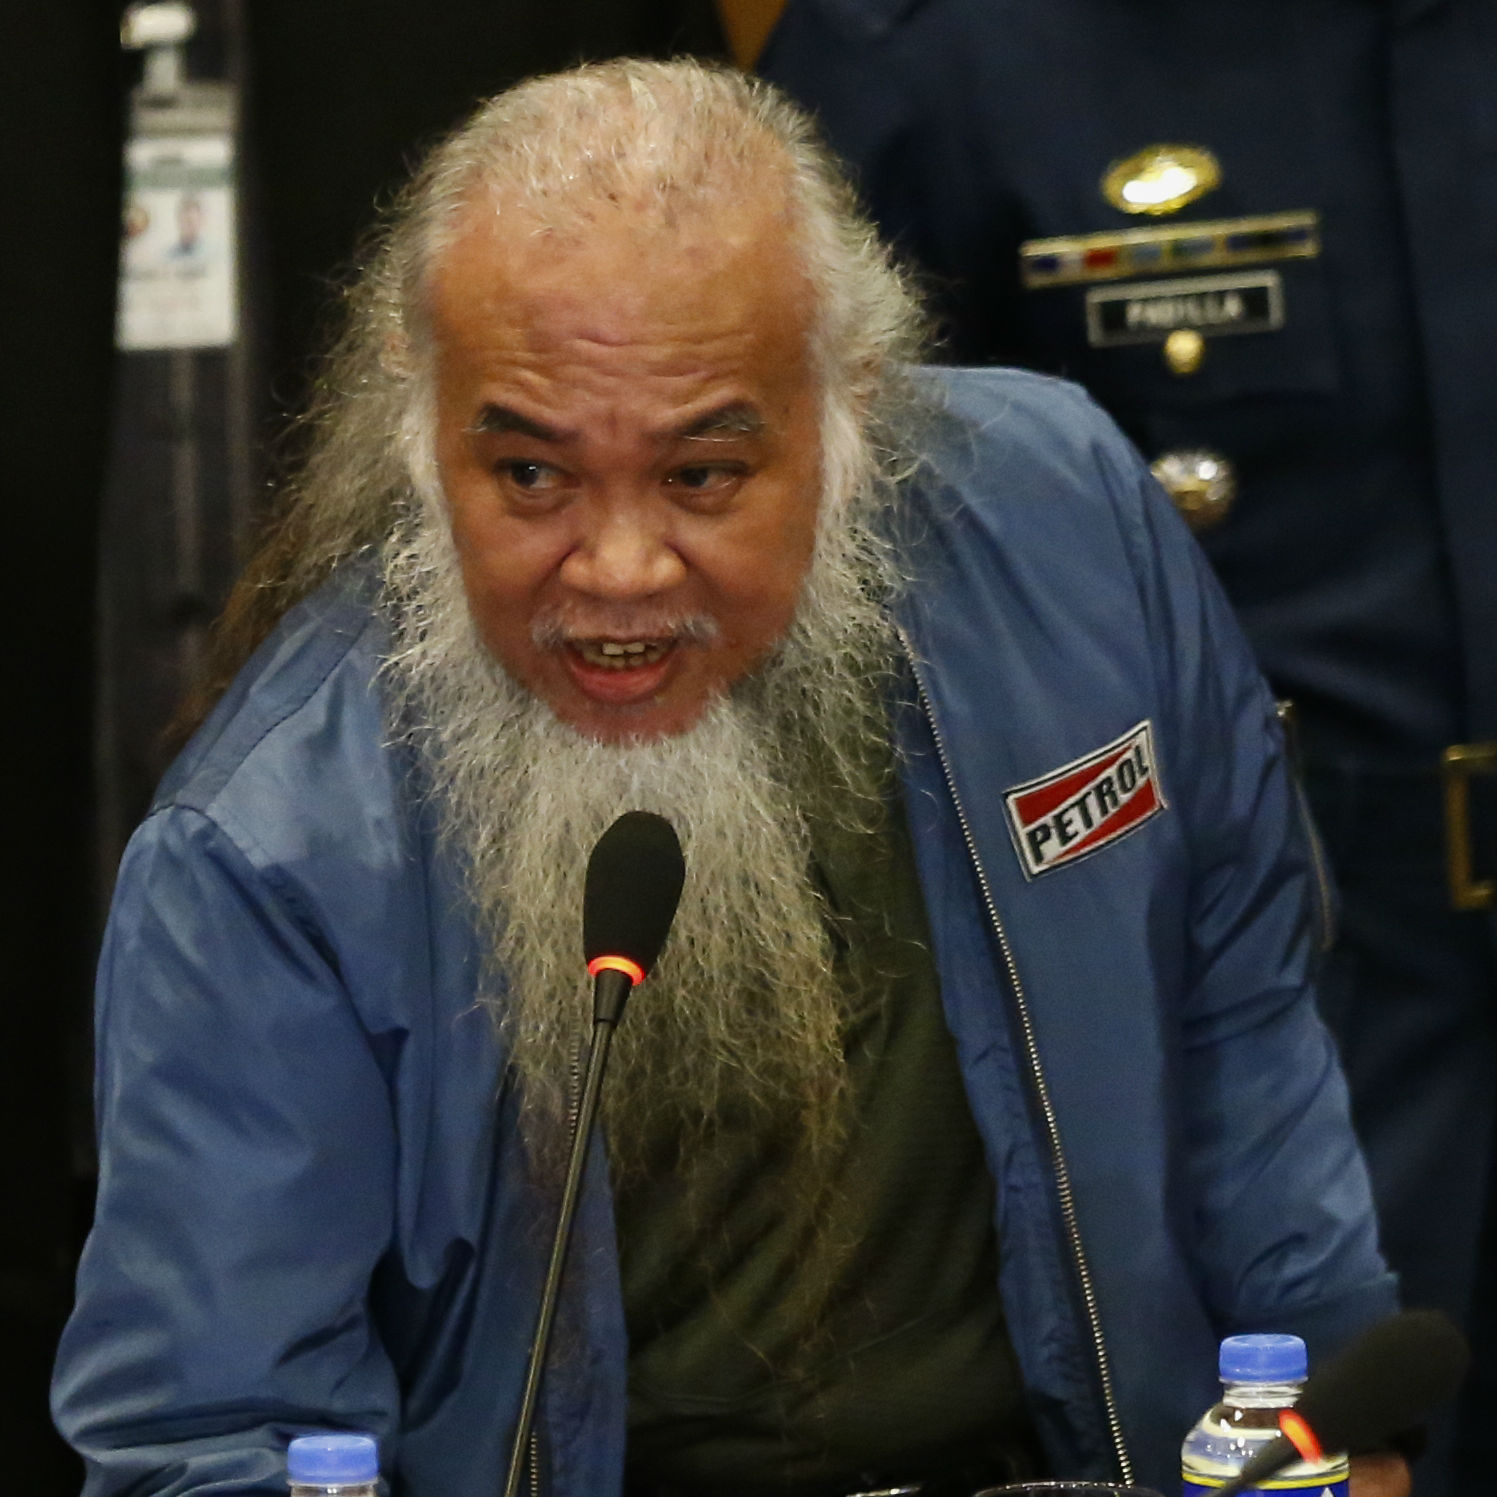 Philippine priest, kidnapped by Islamic militants, freed